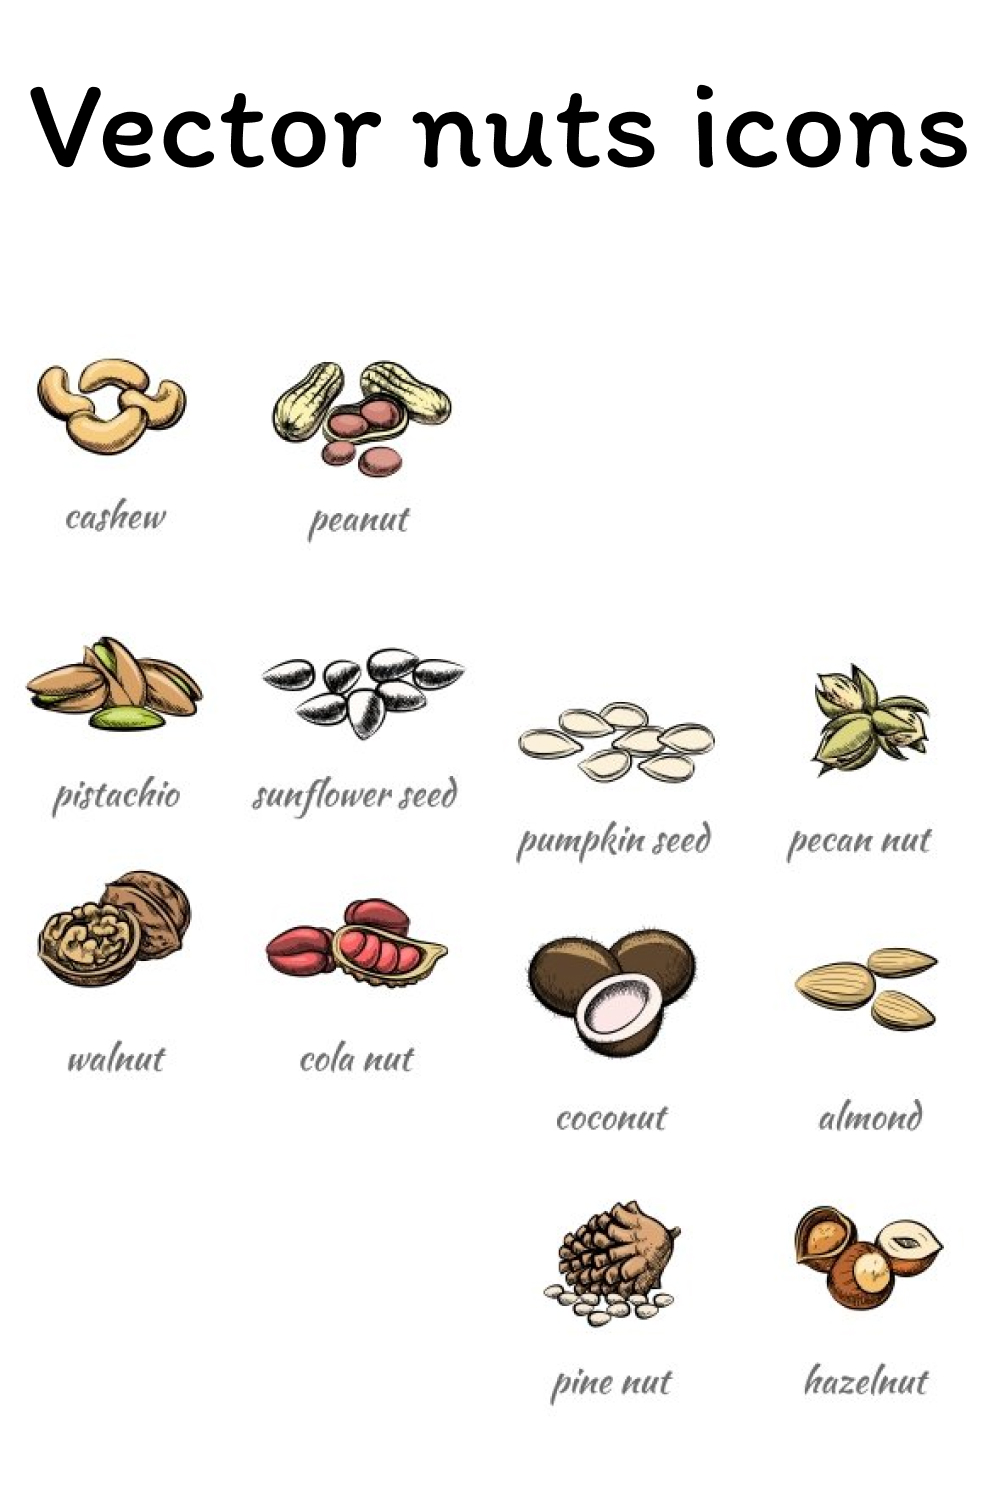 03 vector nuts icons 1000x1500 637